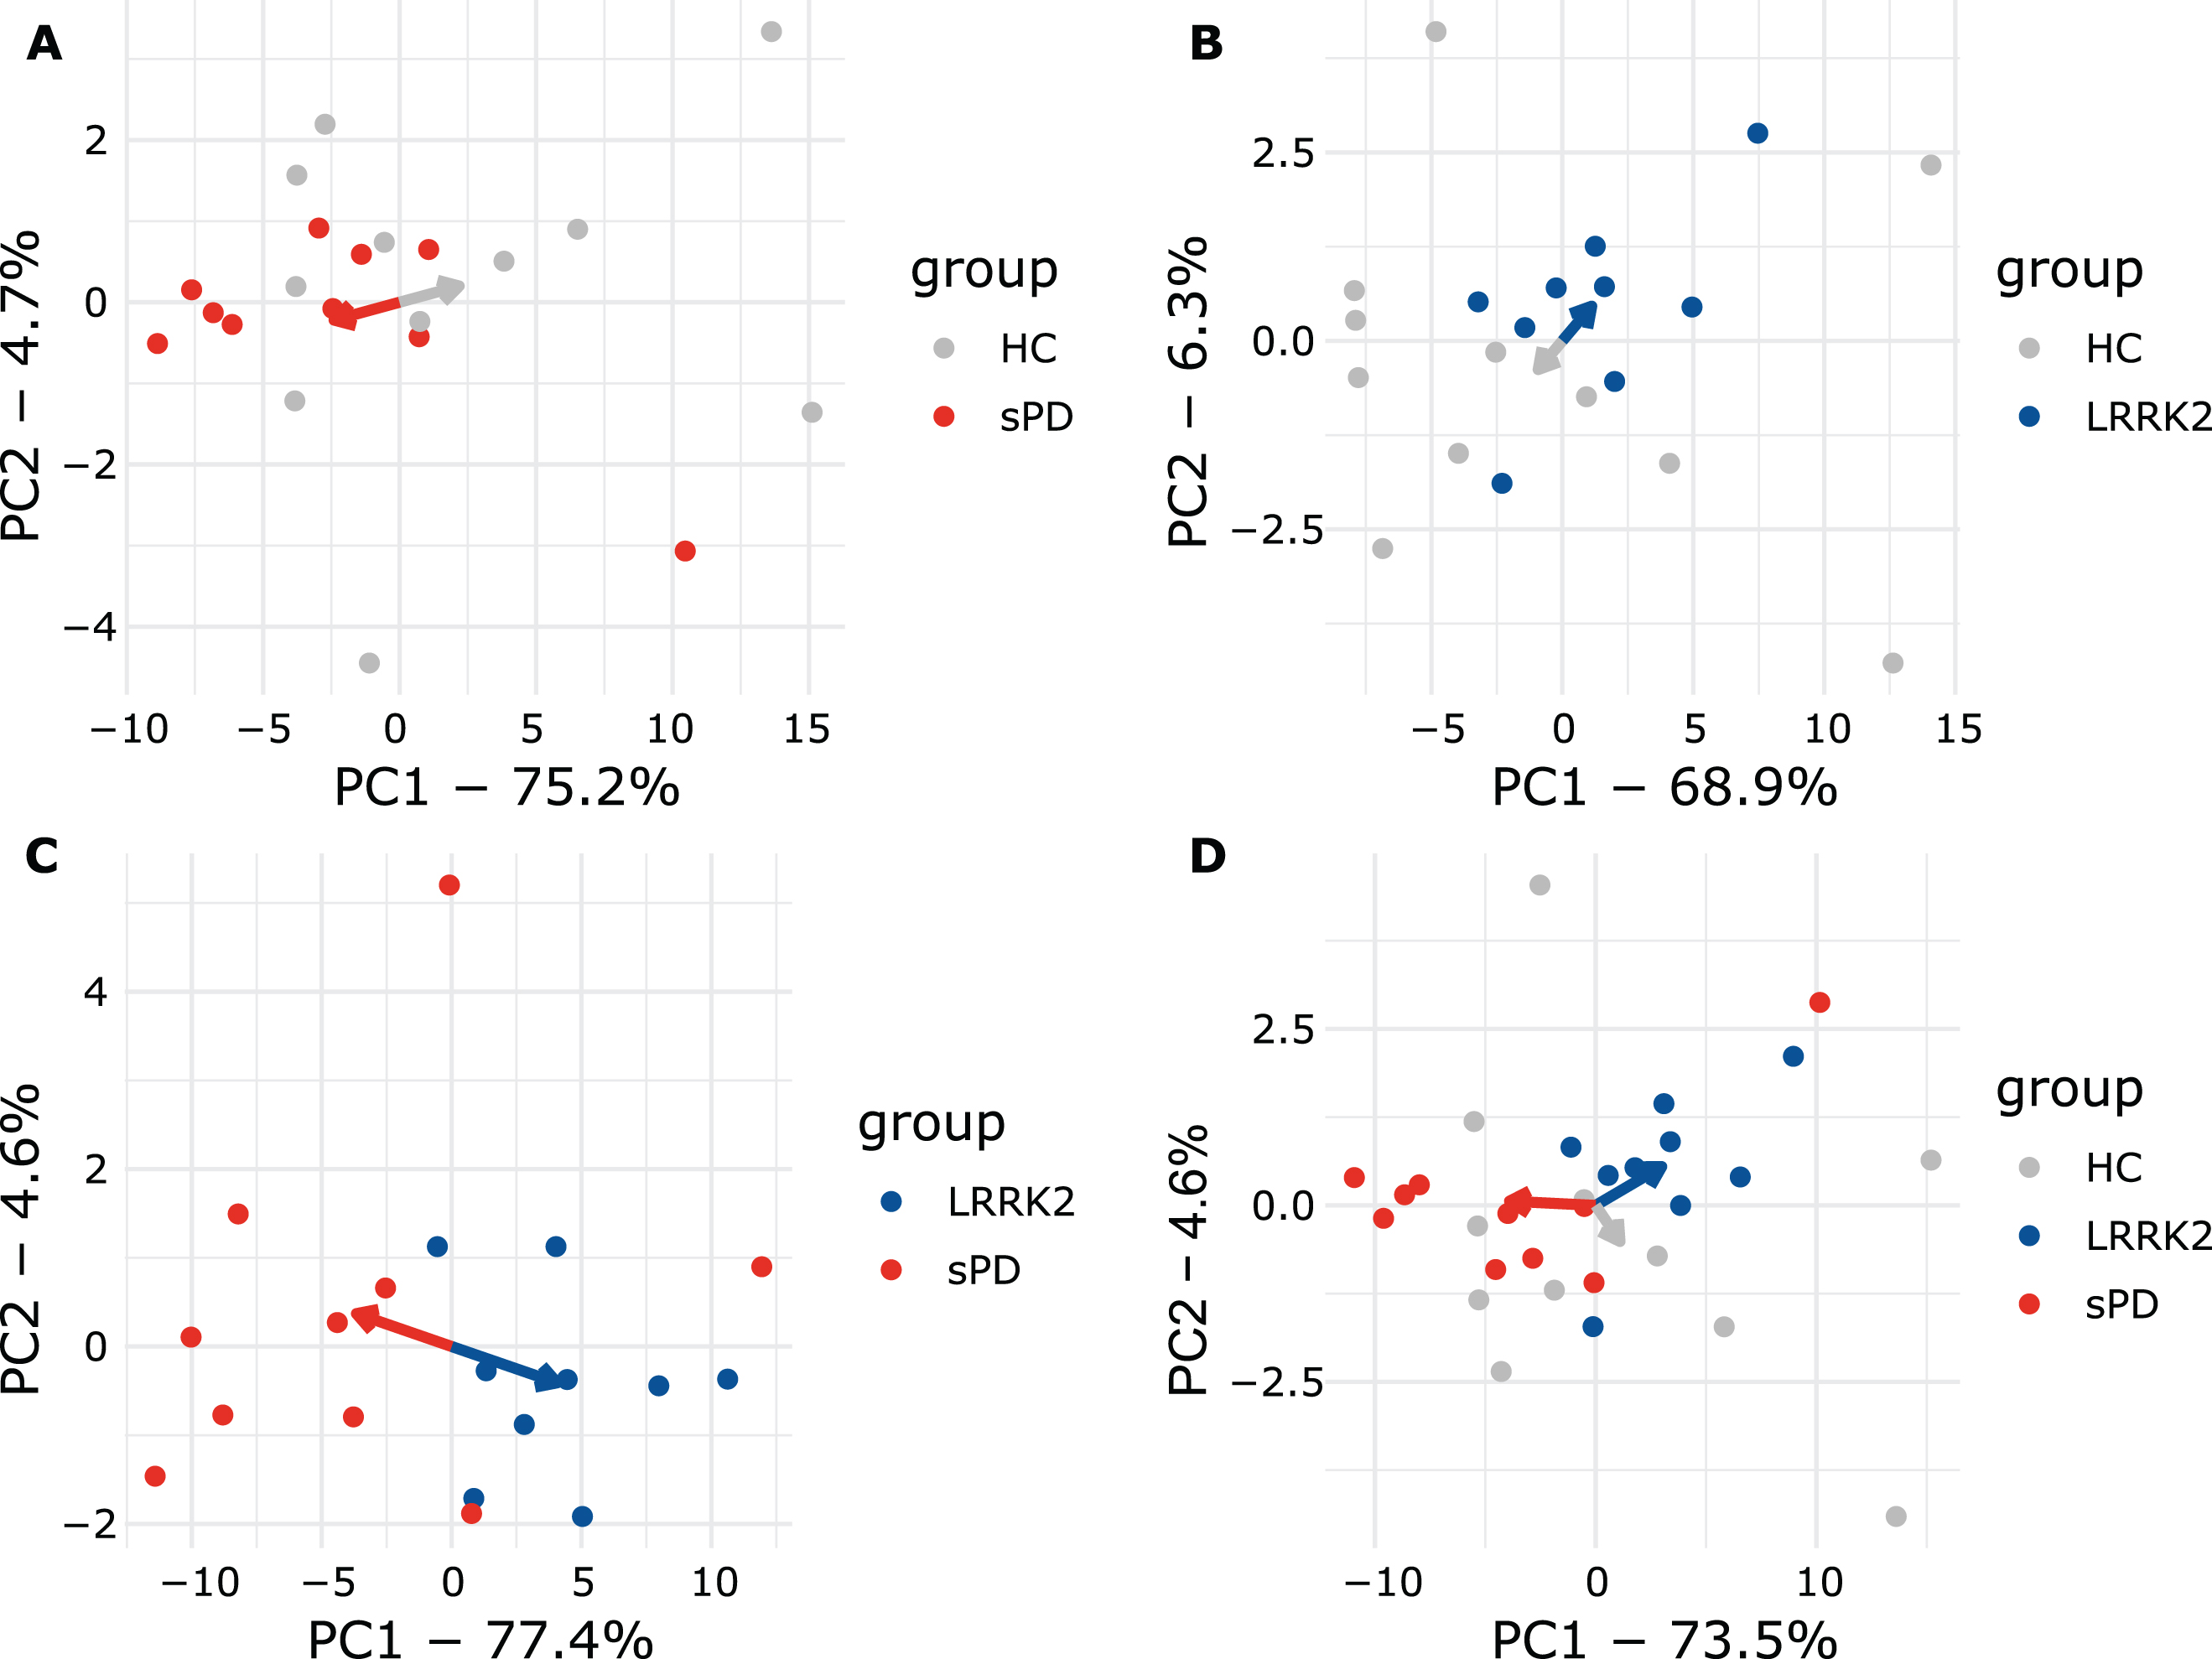 Plasma PCA plots comparing all groups. A) sPD and HC. B) LRRK2MC and HC. C) LRRK2MC and sPD. D) All groups. Arrows point towards the respective mean of PC1 and PC2. In A, B, and C, clear separation can be observed as indicated my arrows pointing towards opposing directions. When including all groups in D, clustering is less apparent but still observable.